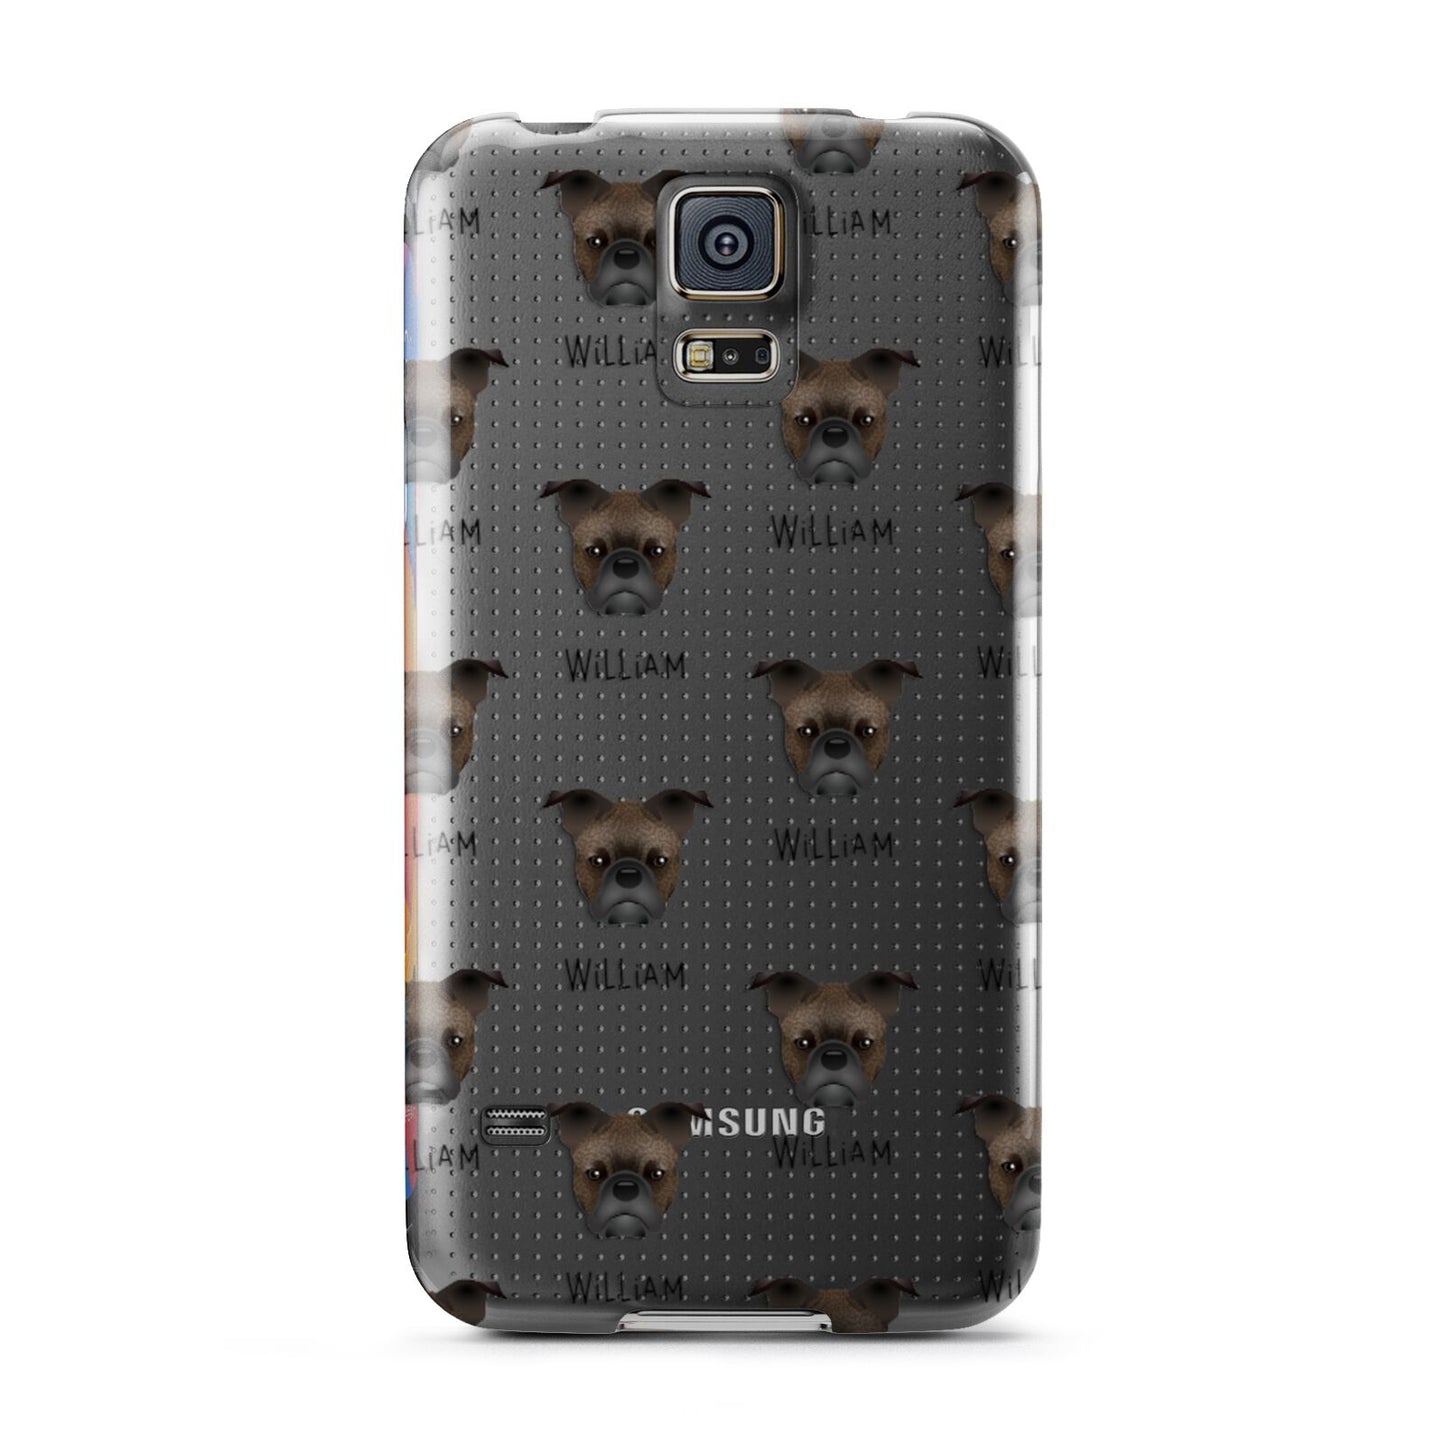 Frug Icon with Name Samsung Galaxy S5 Case